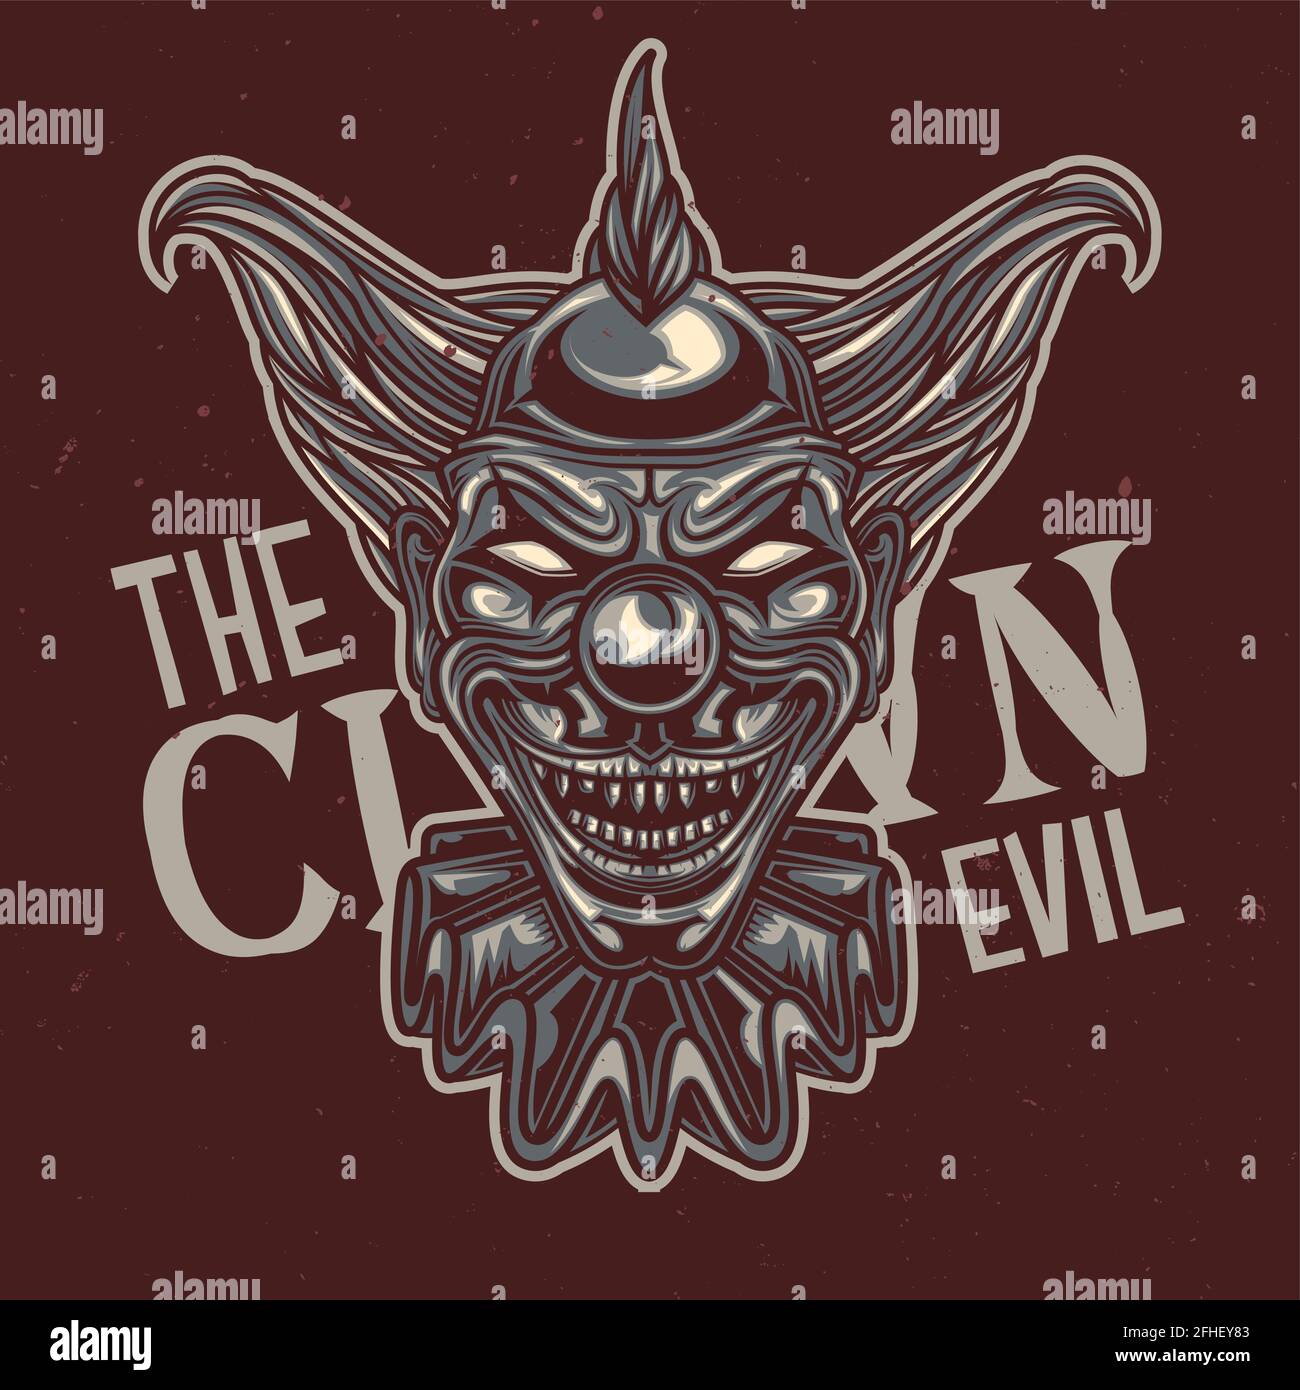 t-shirt-or-poster-design-with-illustration-of-scary-clown-2FHEY83.jpg